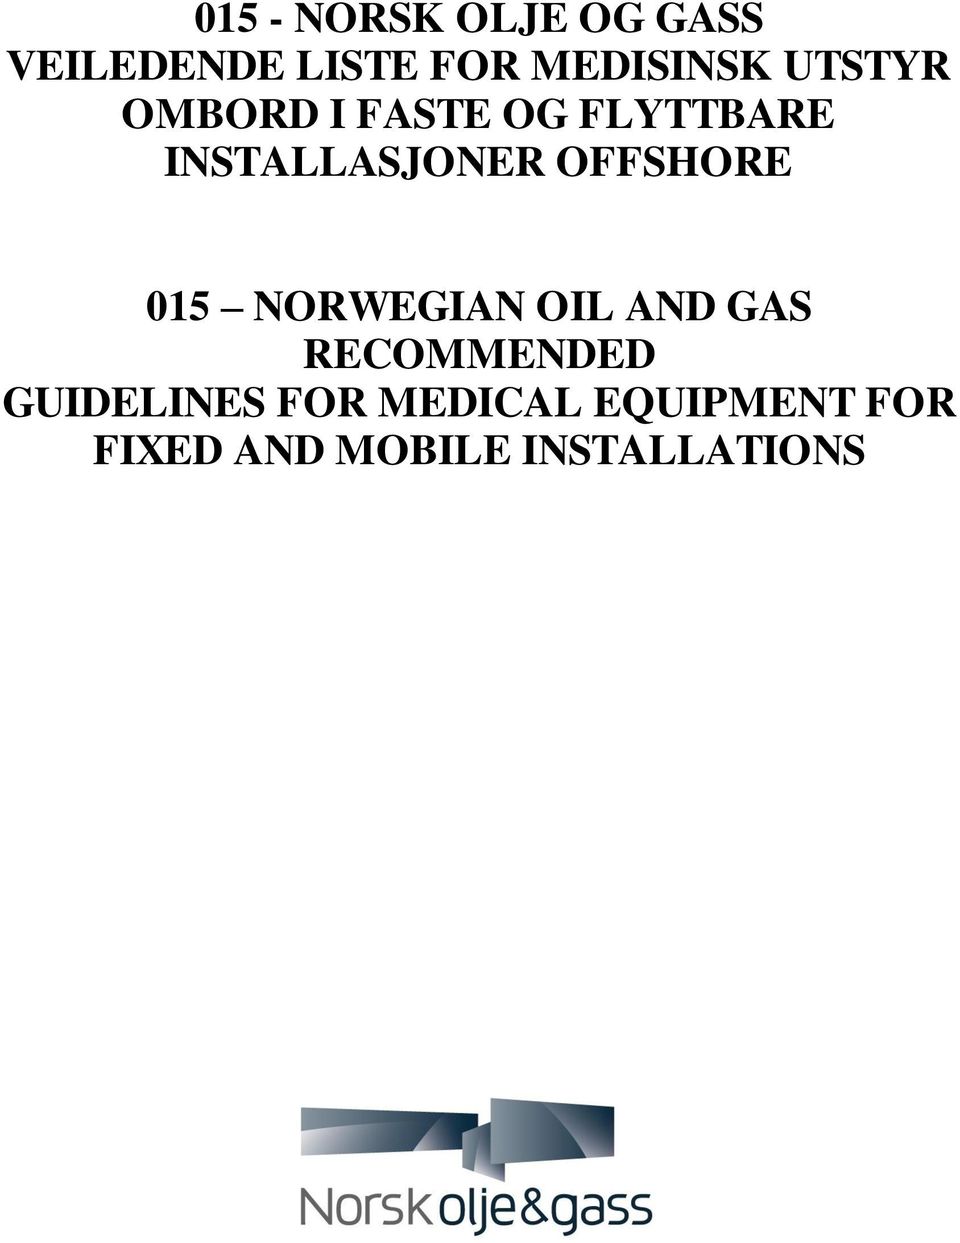 OFFSHORE 015 NORWEGIAN OIL AND GAS RECOMMENDED